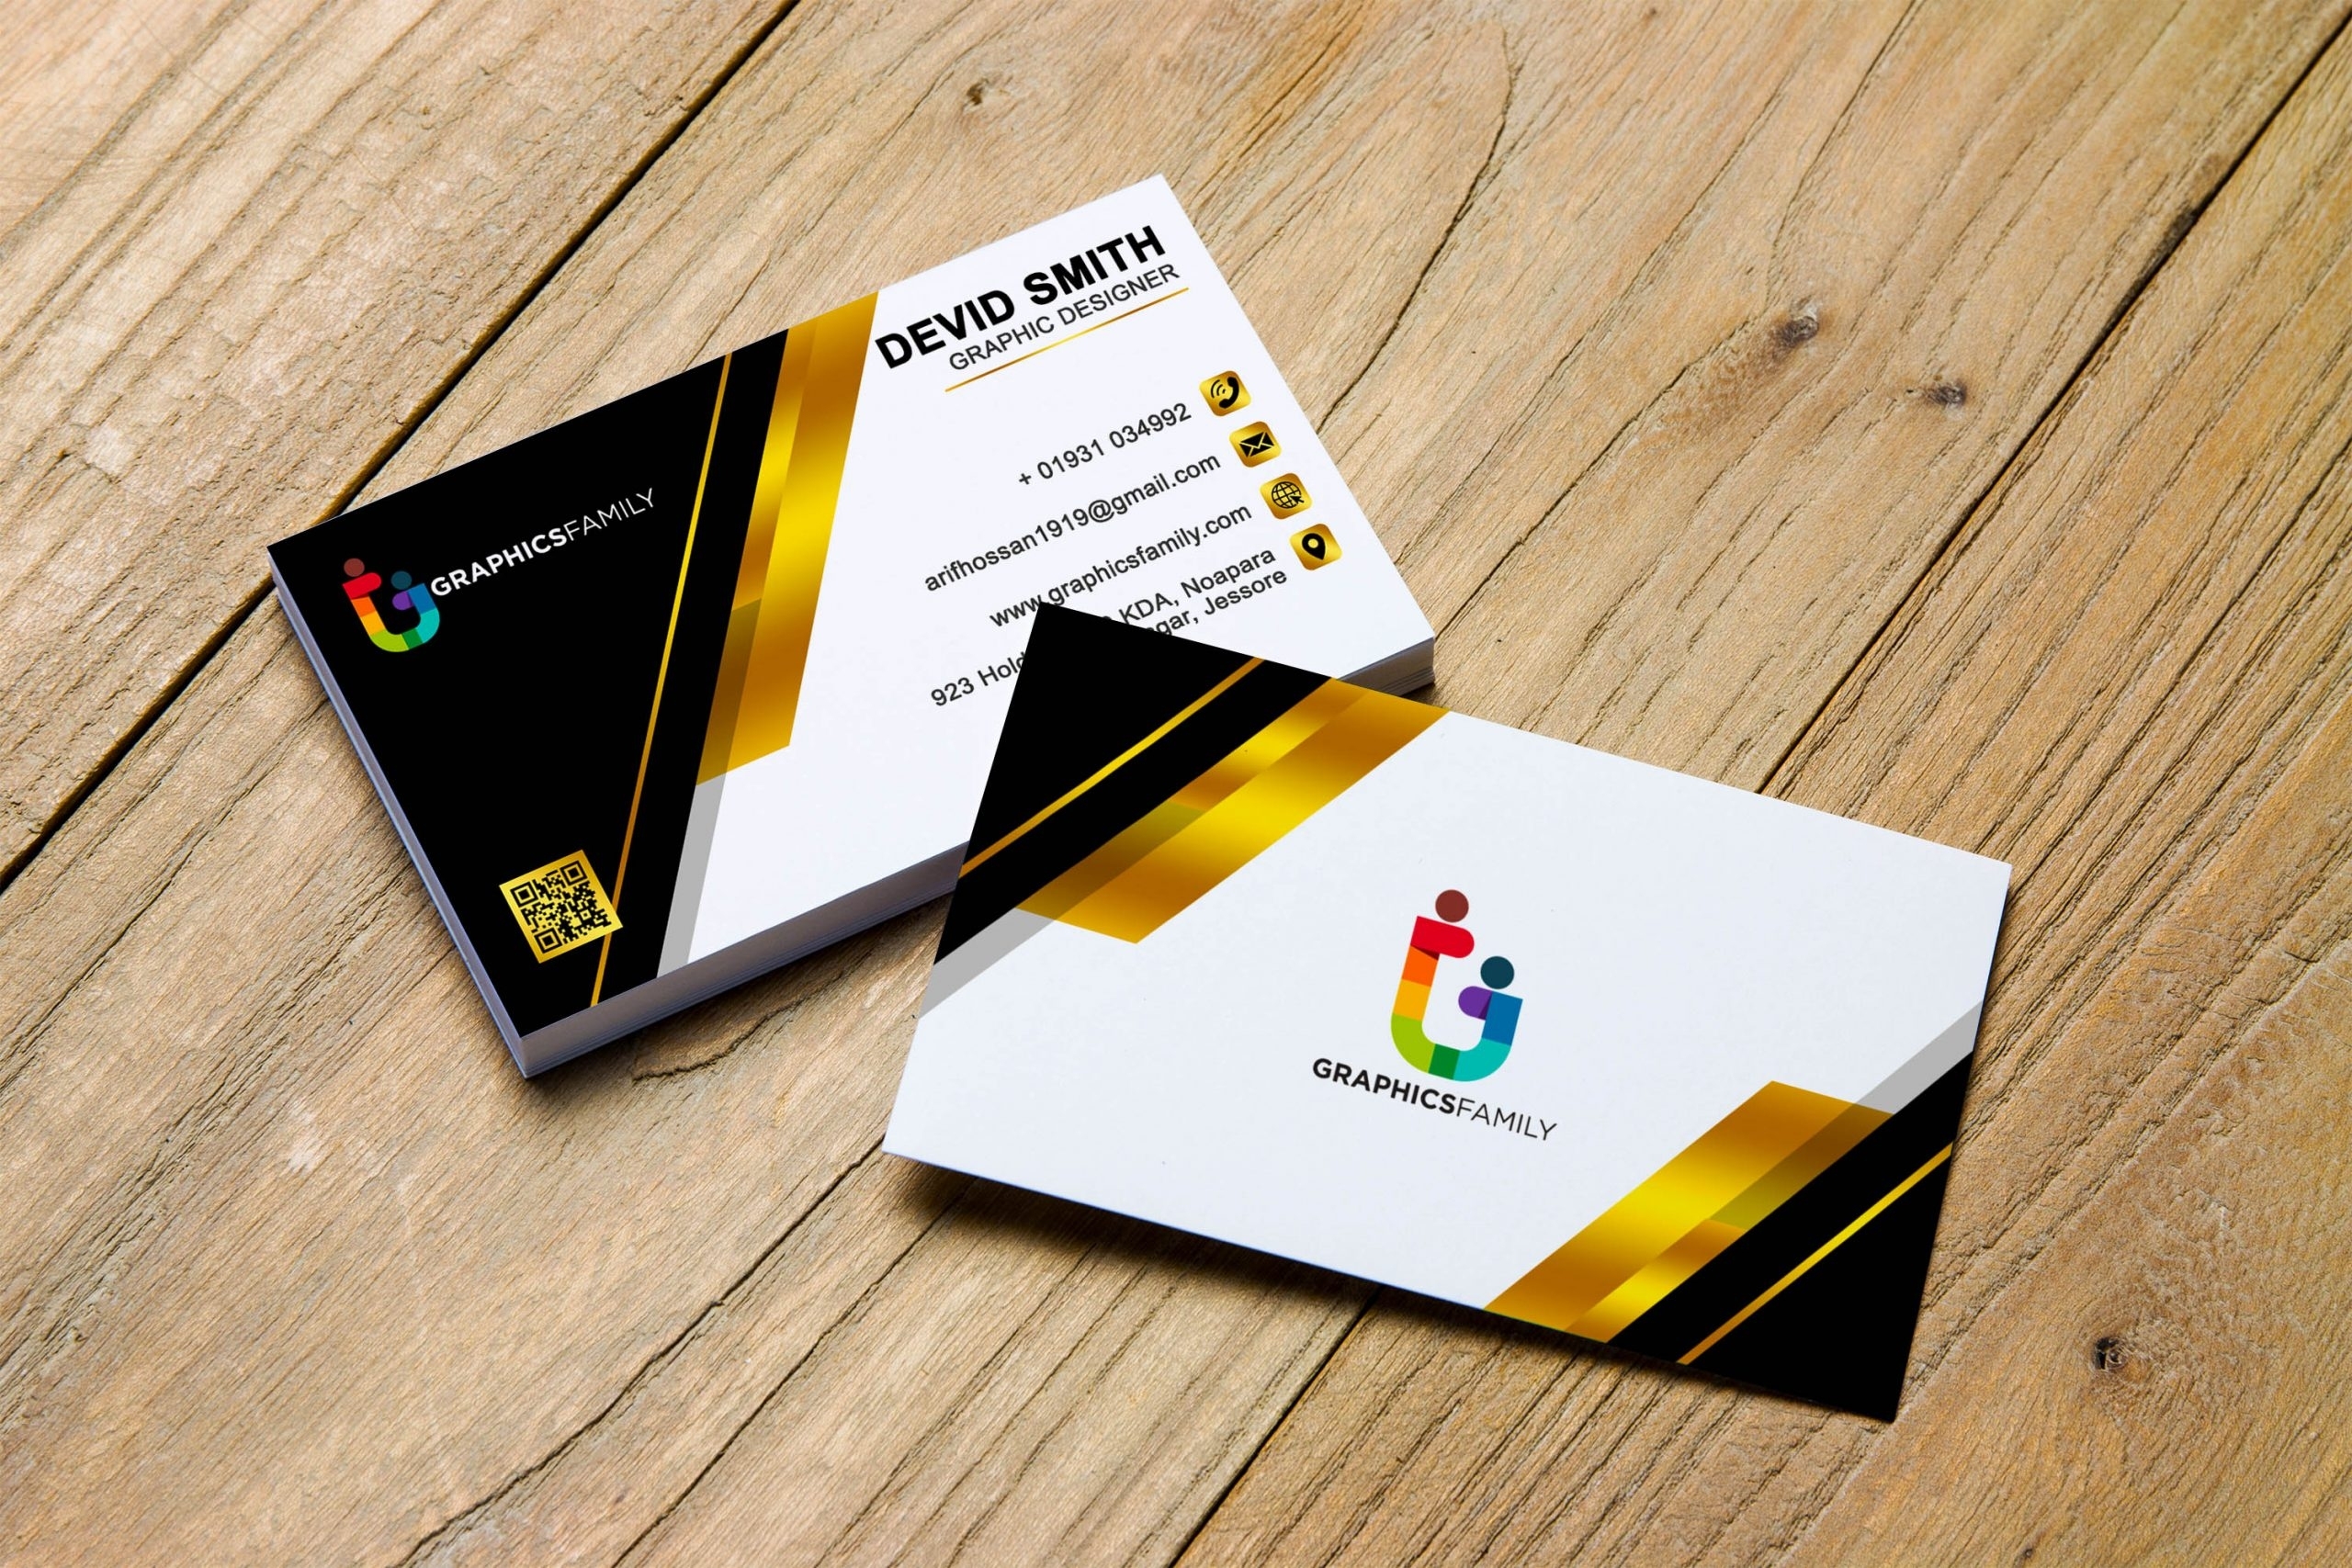 Free Accounting Analyst Business Card .Psd Template - Graphicsfamily intended for Free Business Card Templates In Psd Format